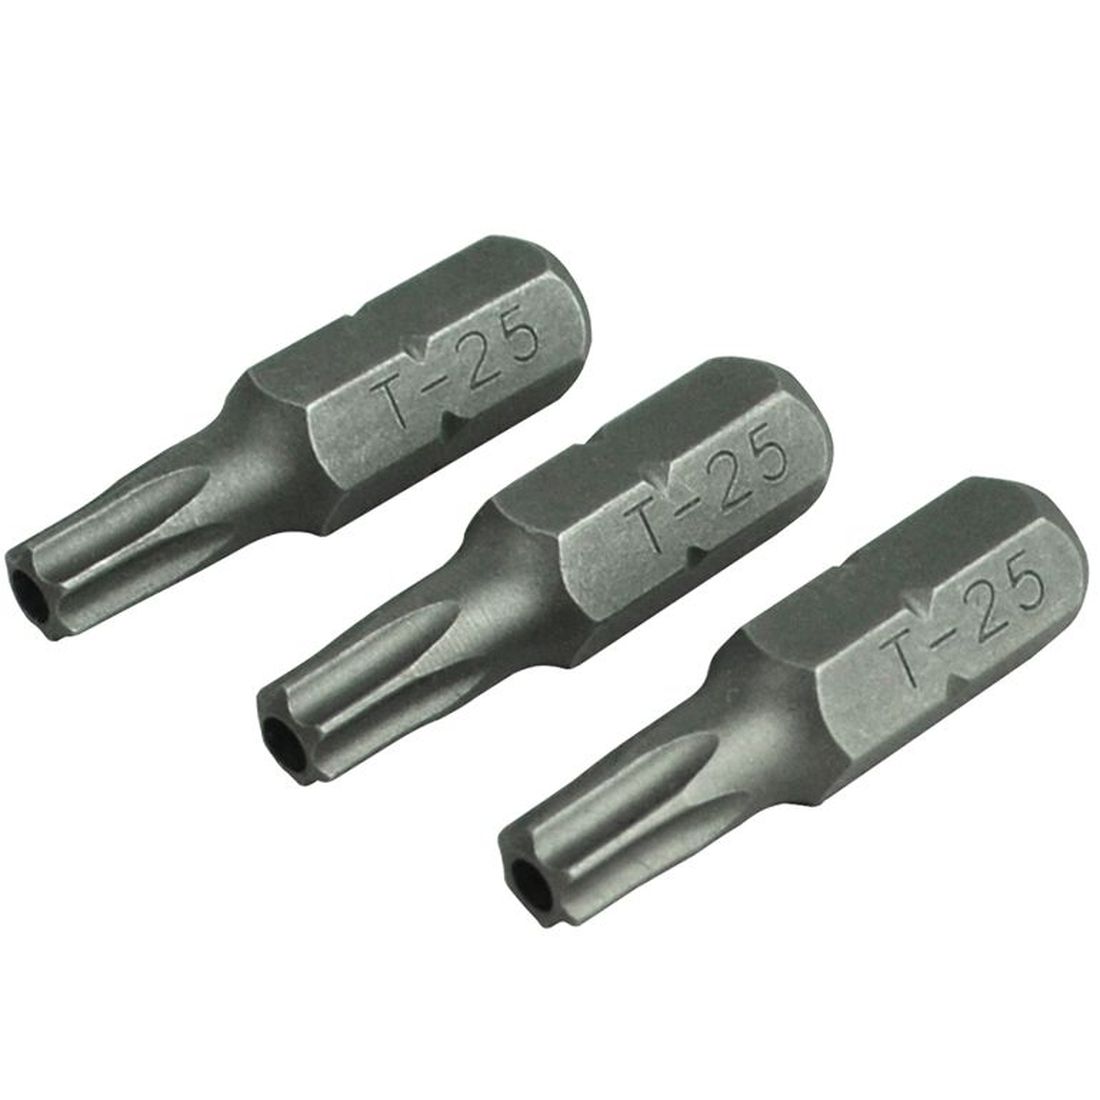 Faithfull Security S2 Grade Steel Screwdriver Bits T25S x 25mm (Pack 3)                   